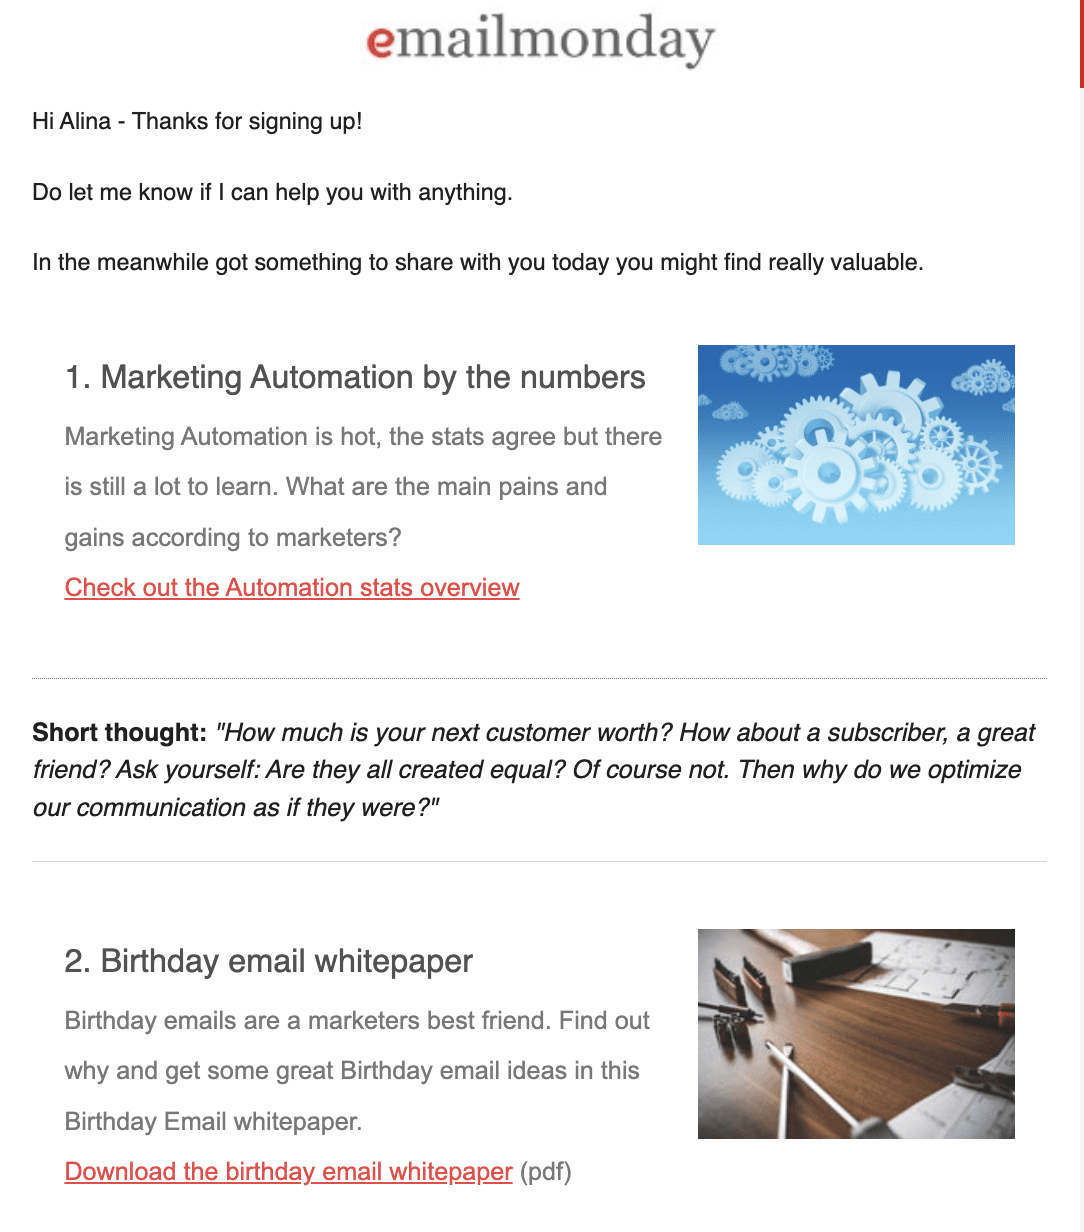 Newsletter about marketing and email solution